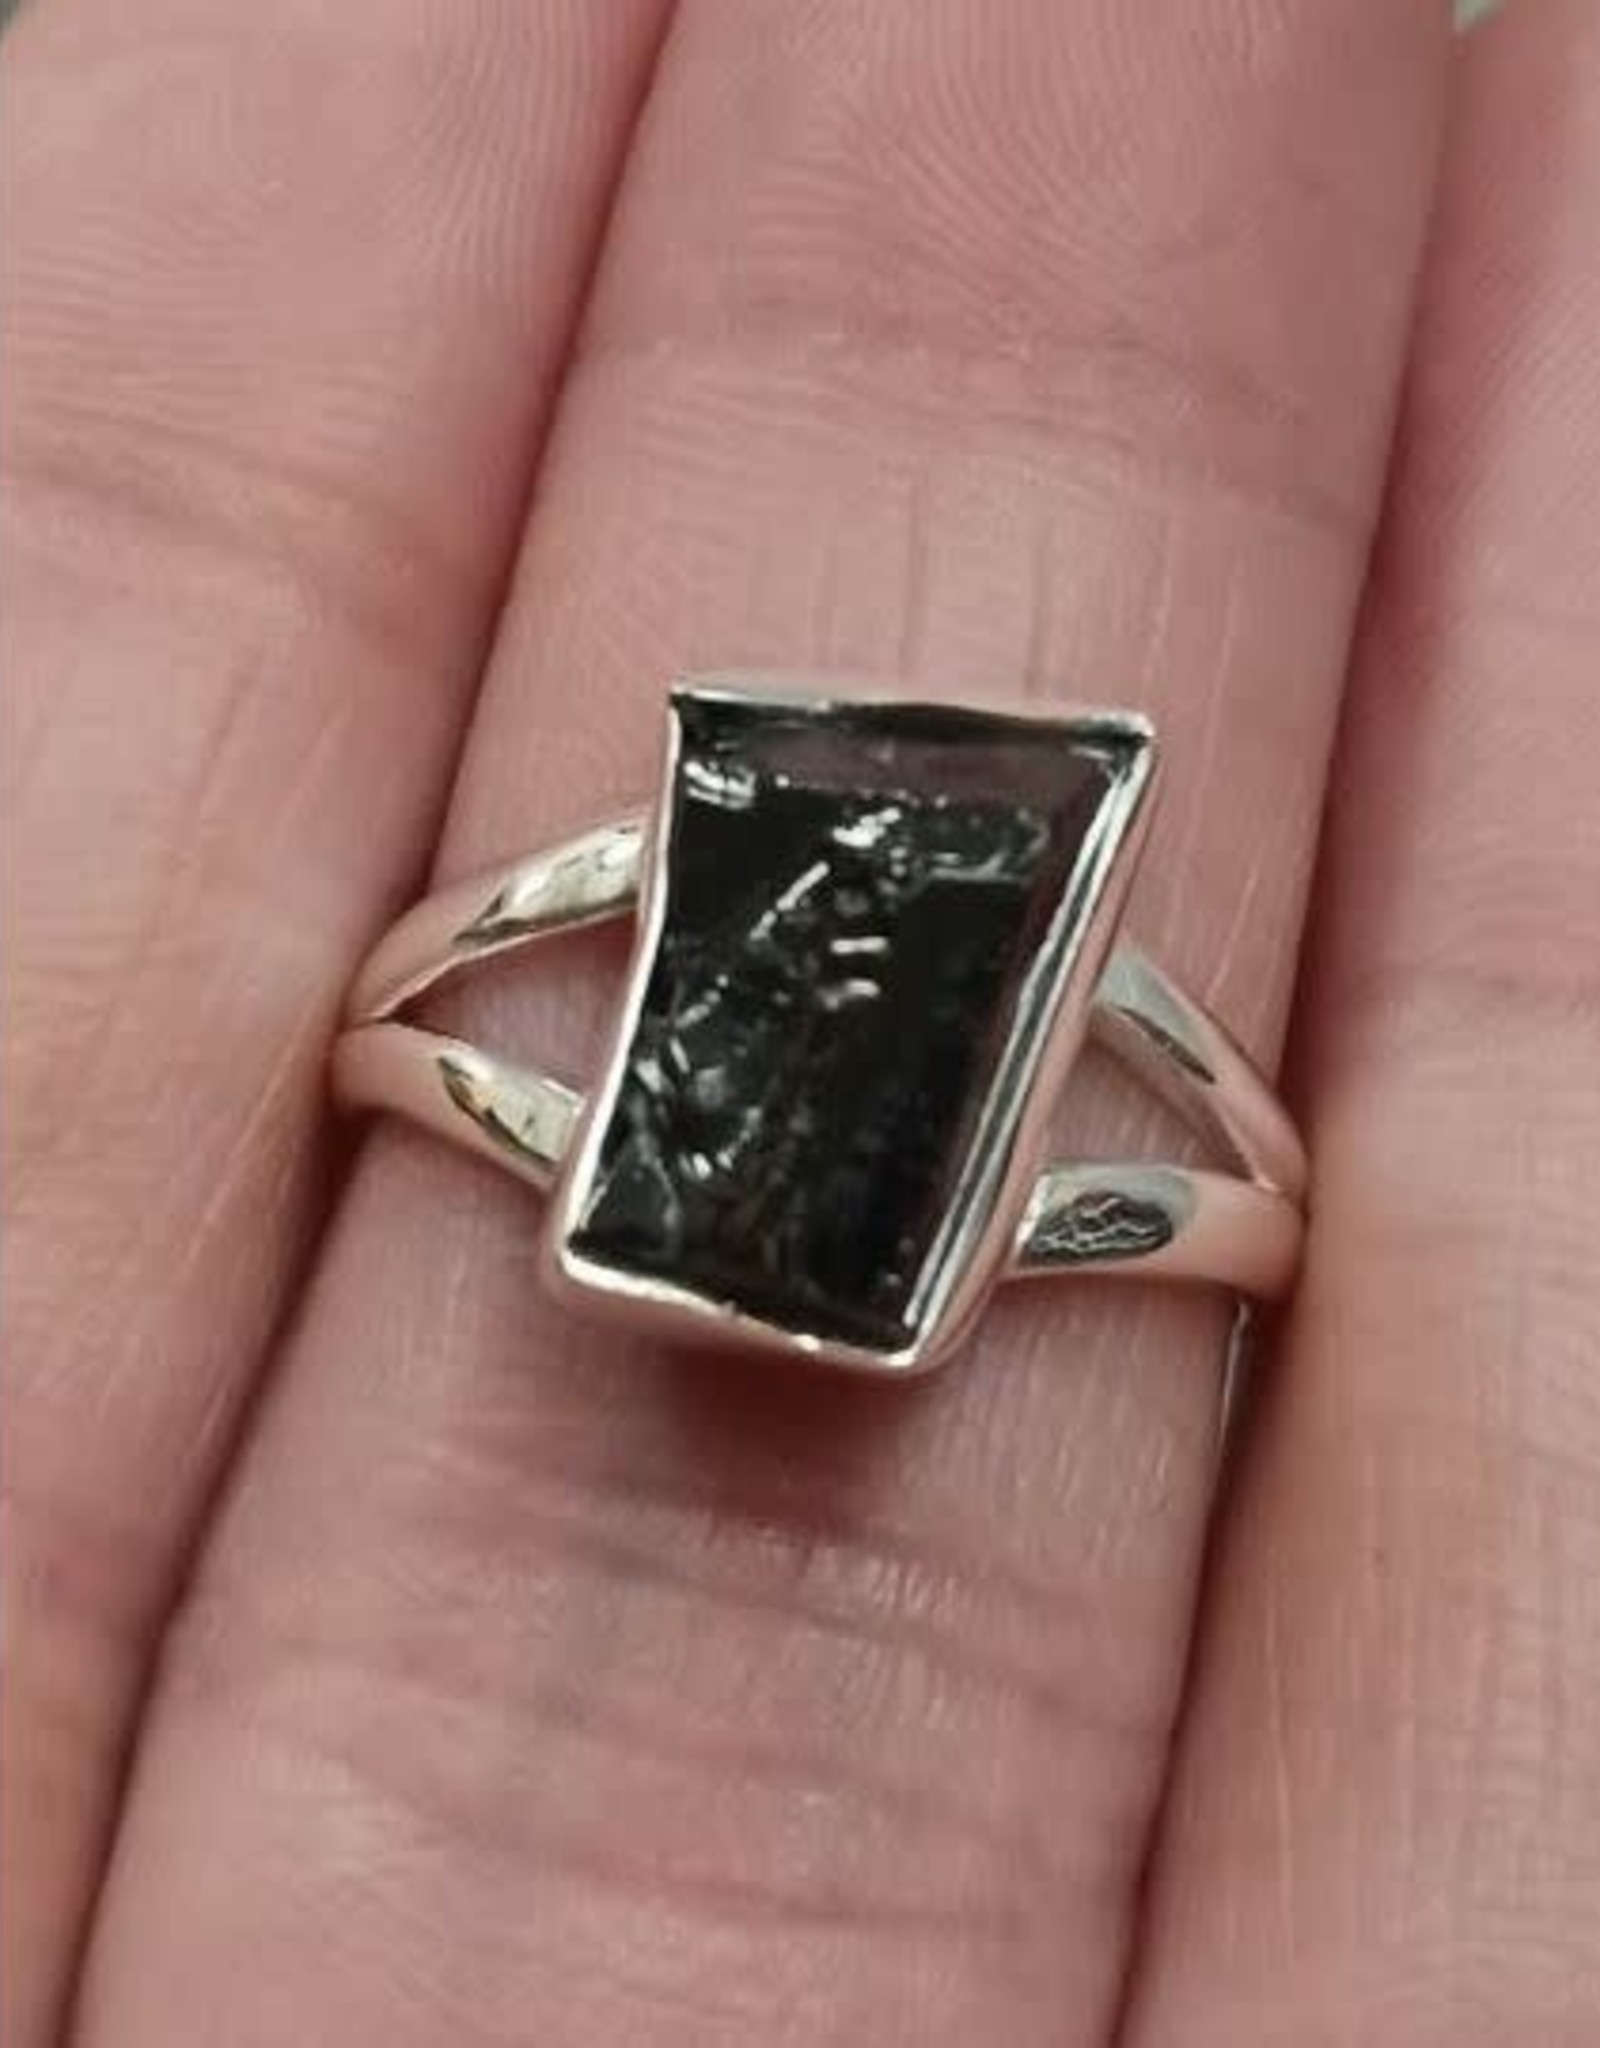 Shungite Ring A - Size 8 Sterling Silver